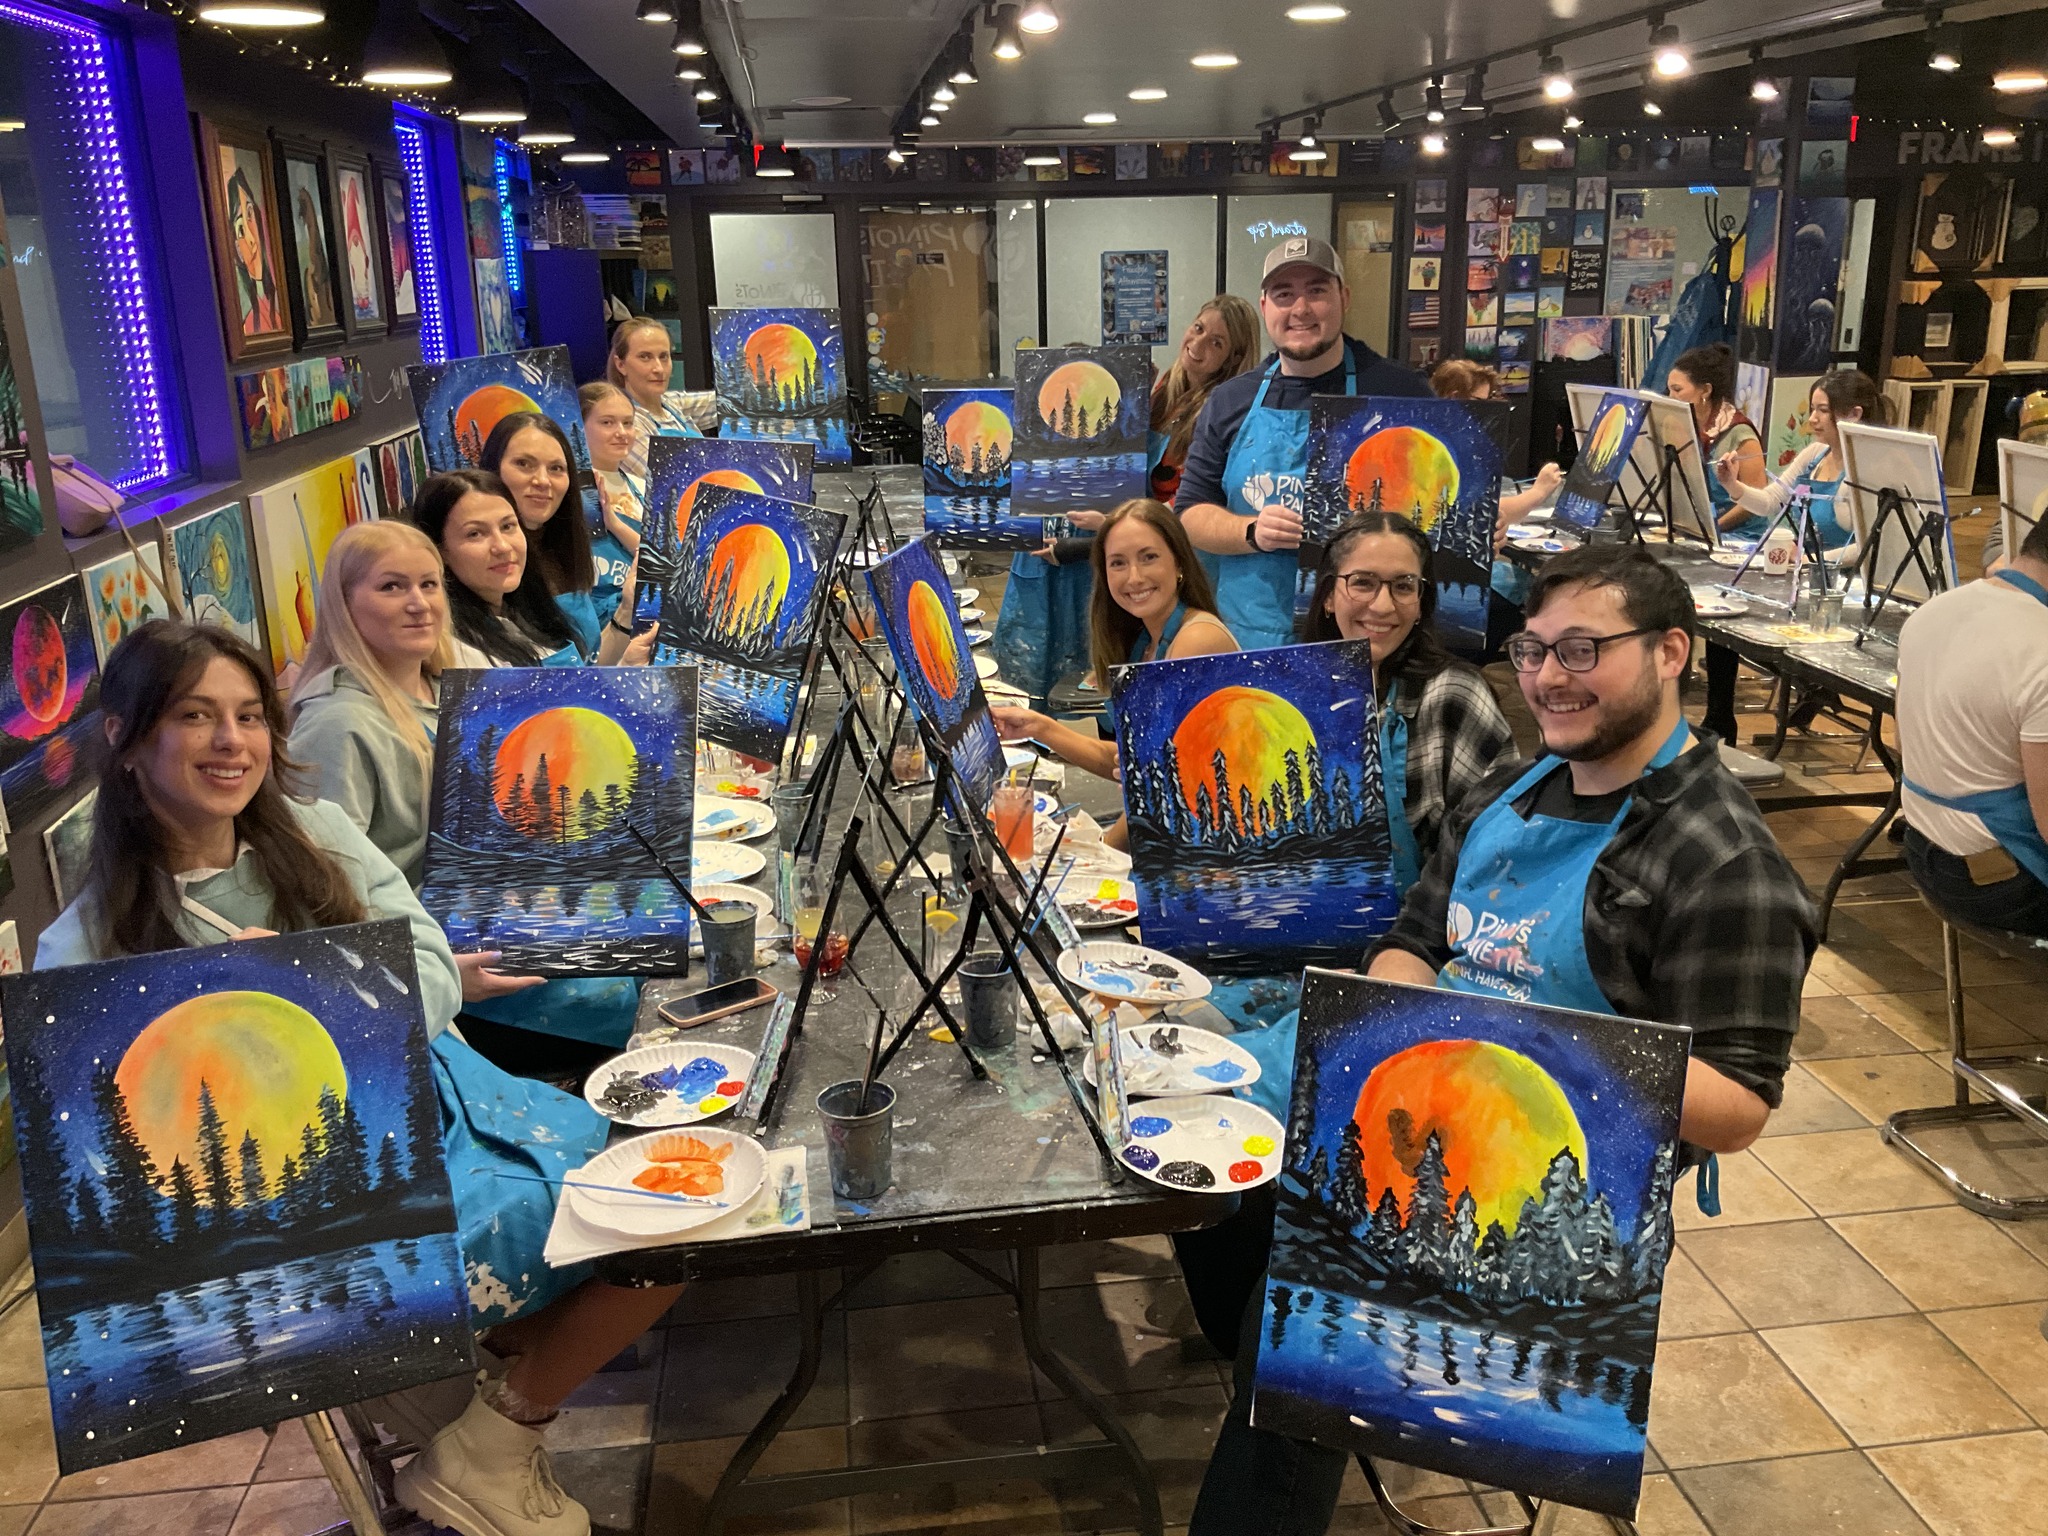 Looking For A Fun & Creative Activity To Enjoy With Friends? Try Our Paint & Sip classes in Downtown Naperville.